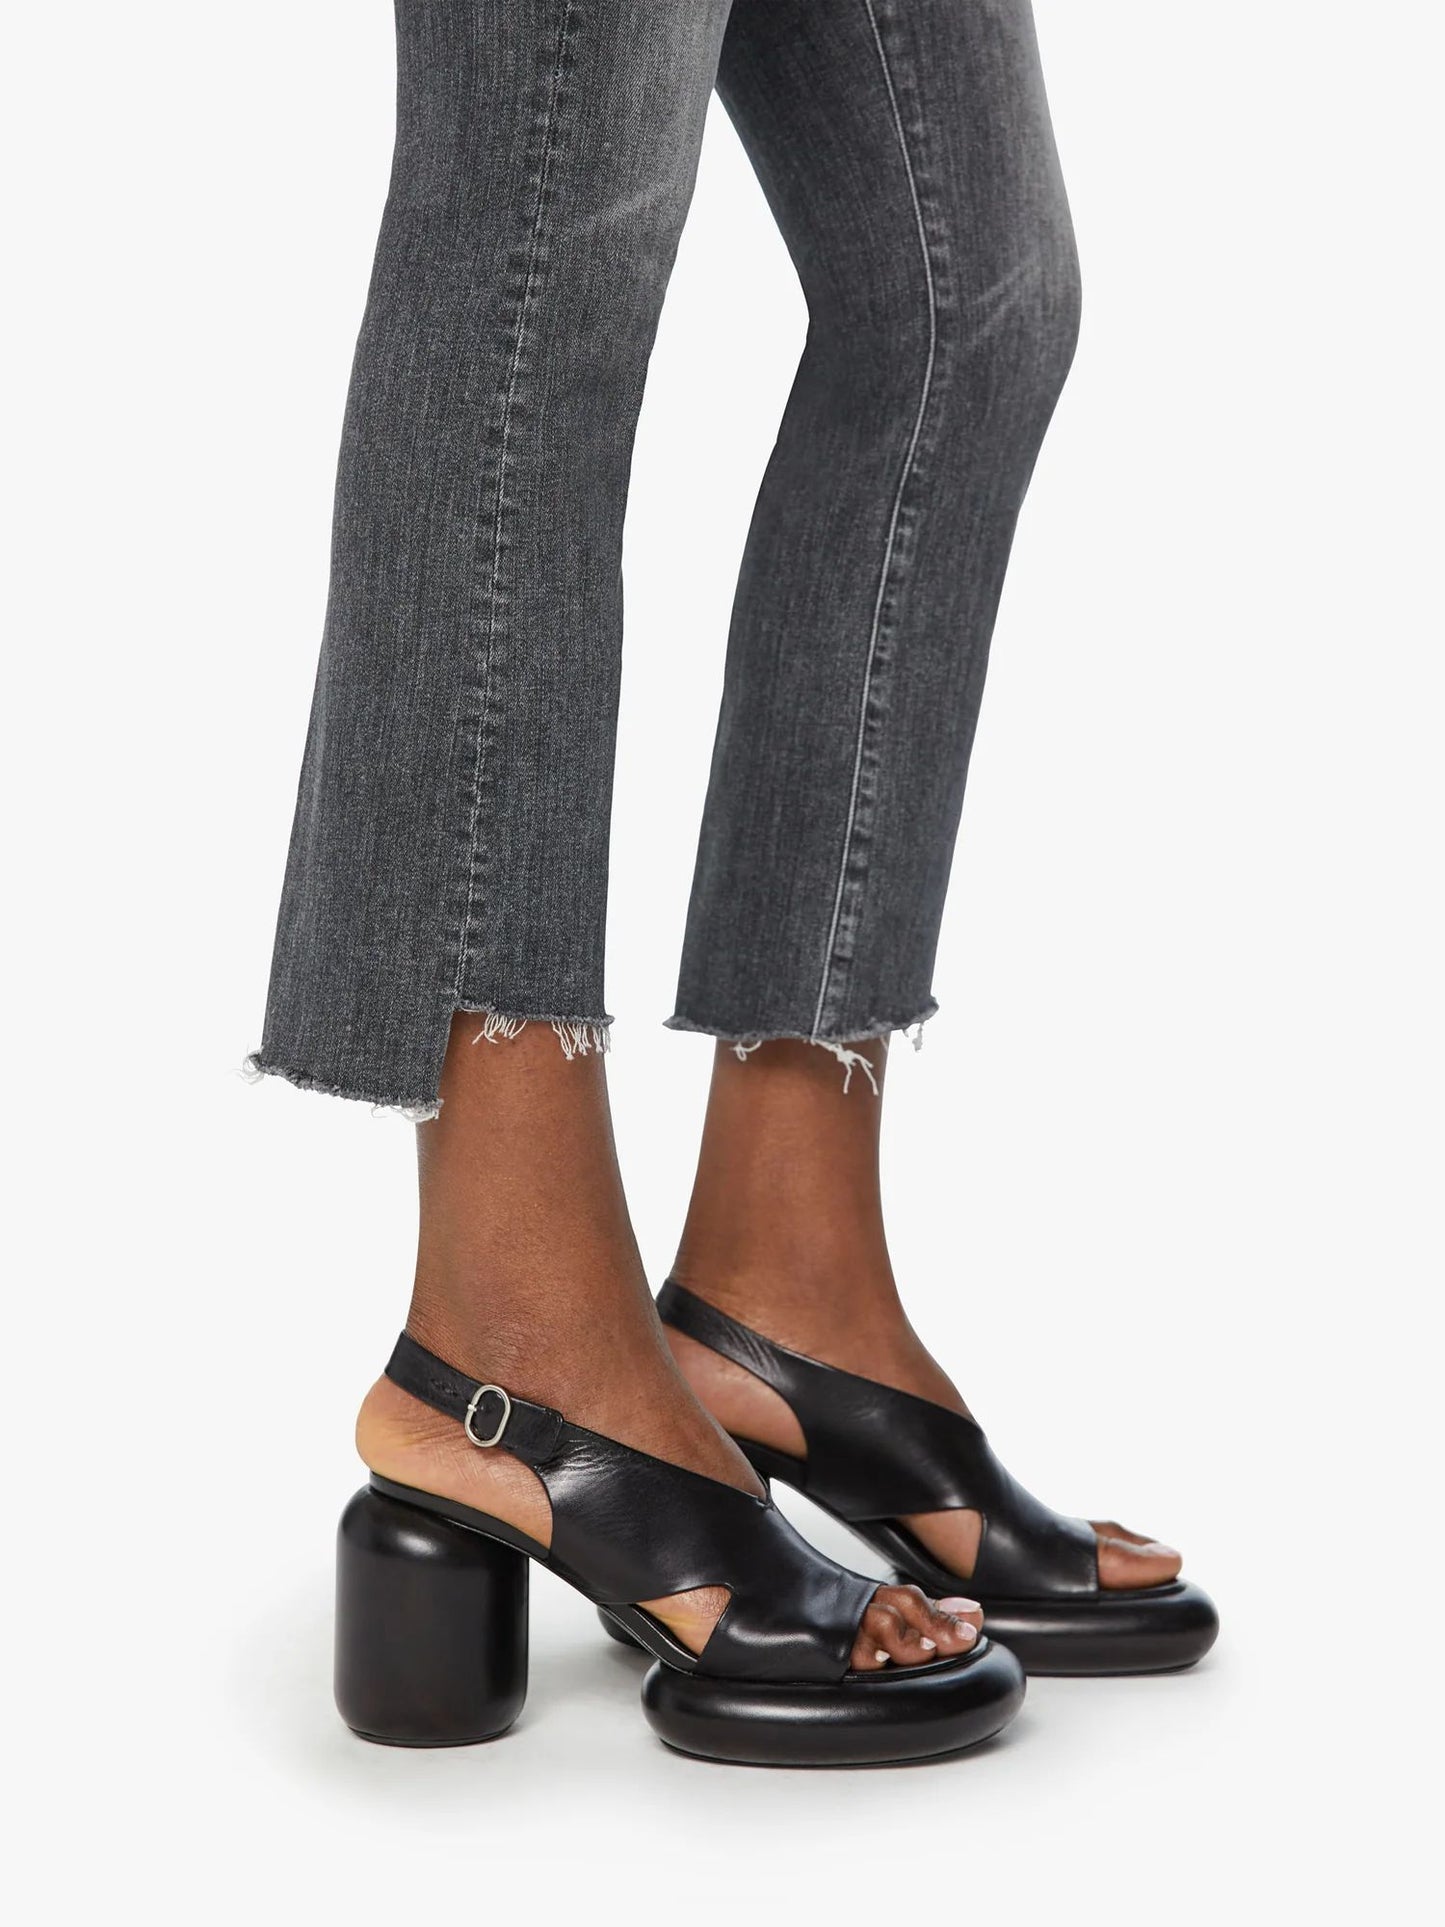 Mother Jeans The Insider crop step fray